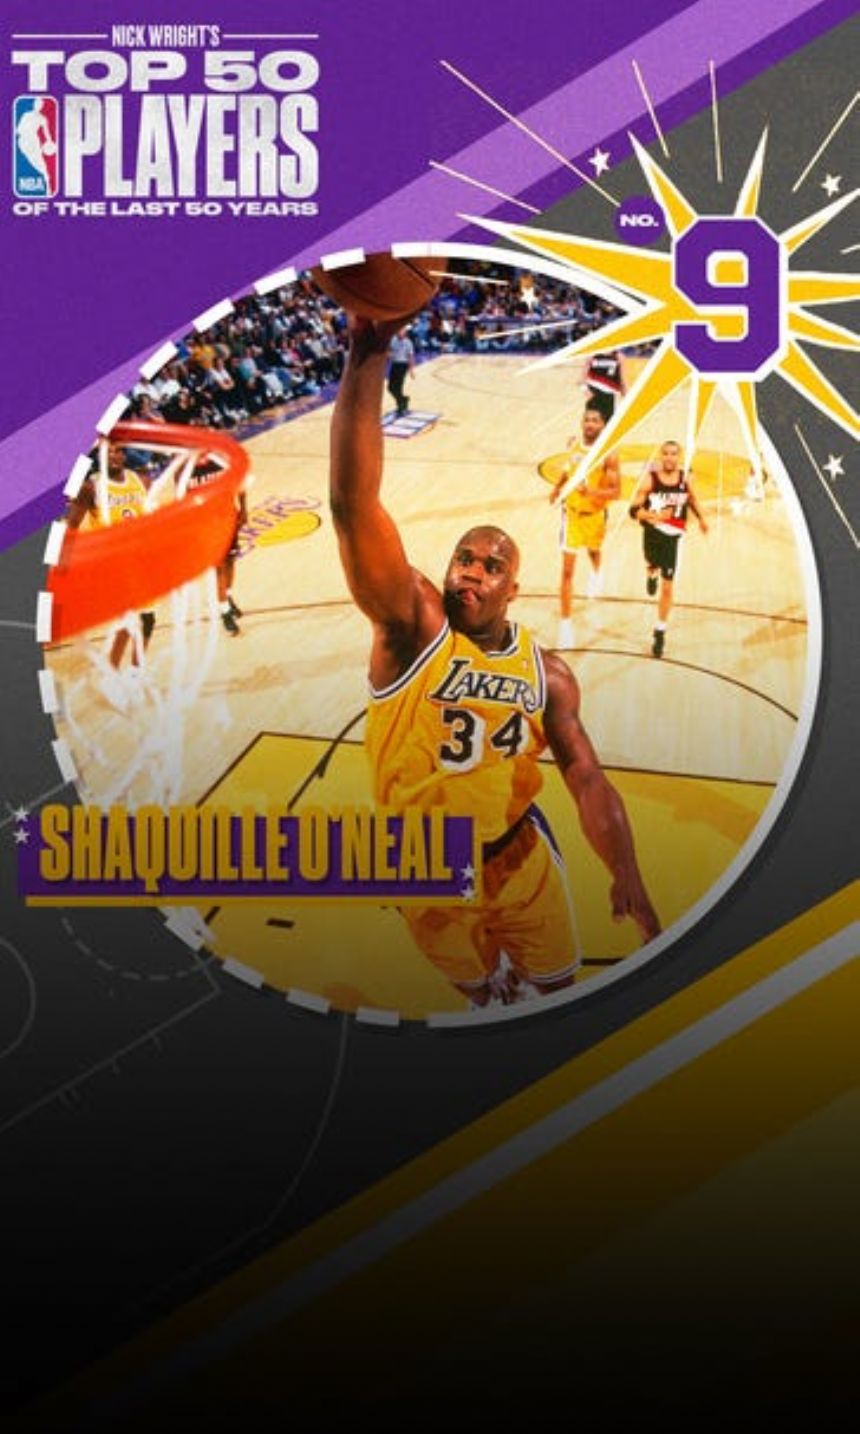 Top 50 NBA players from last 50 years: Shaquille O'Neal ranks No. 9